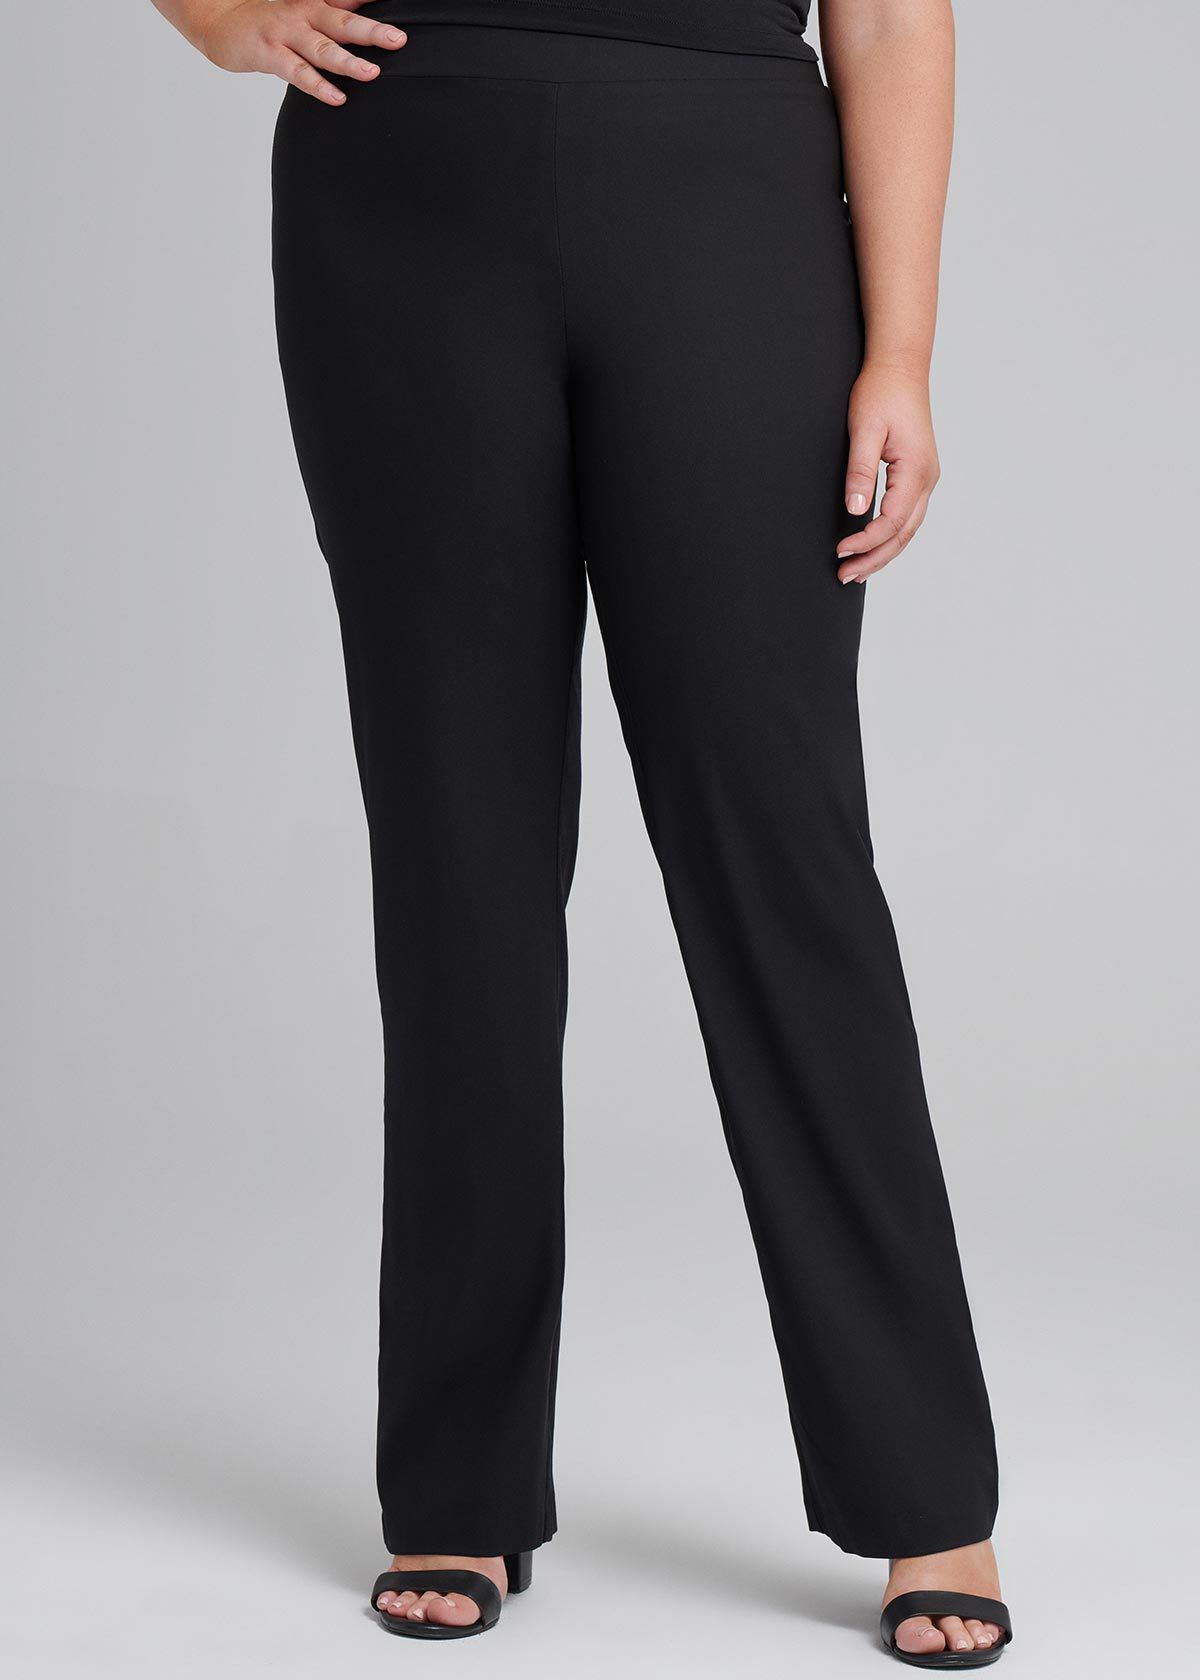 Plus Size Pant Suits and Work Pants 